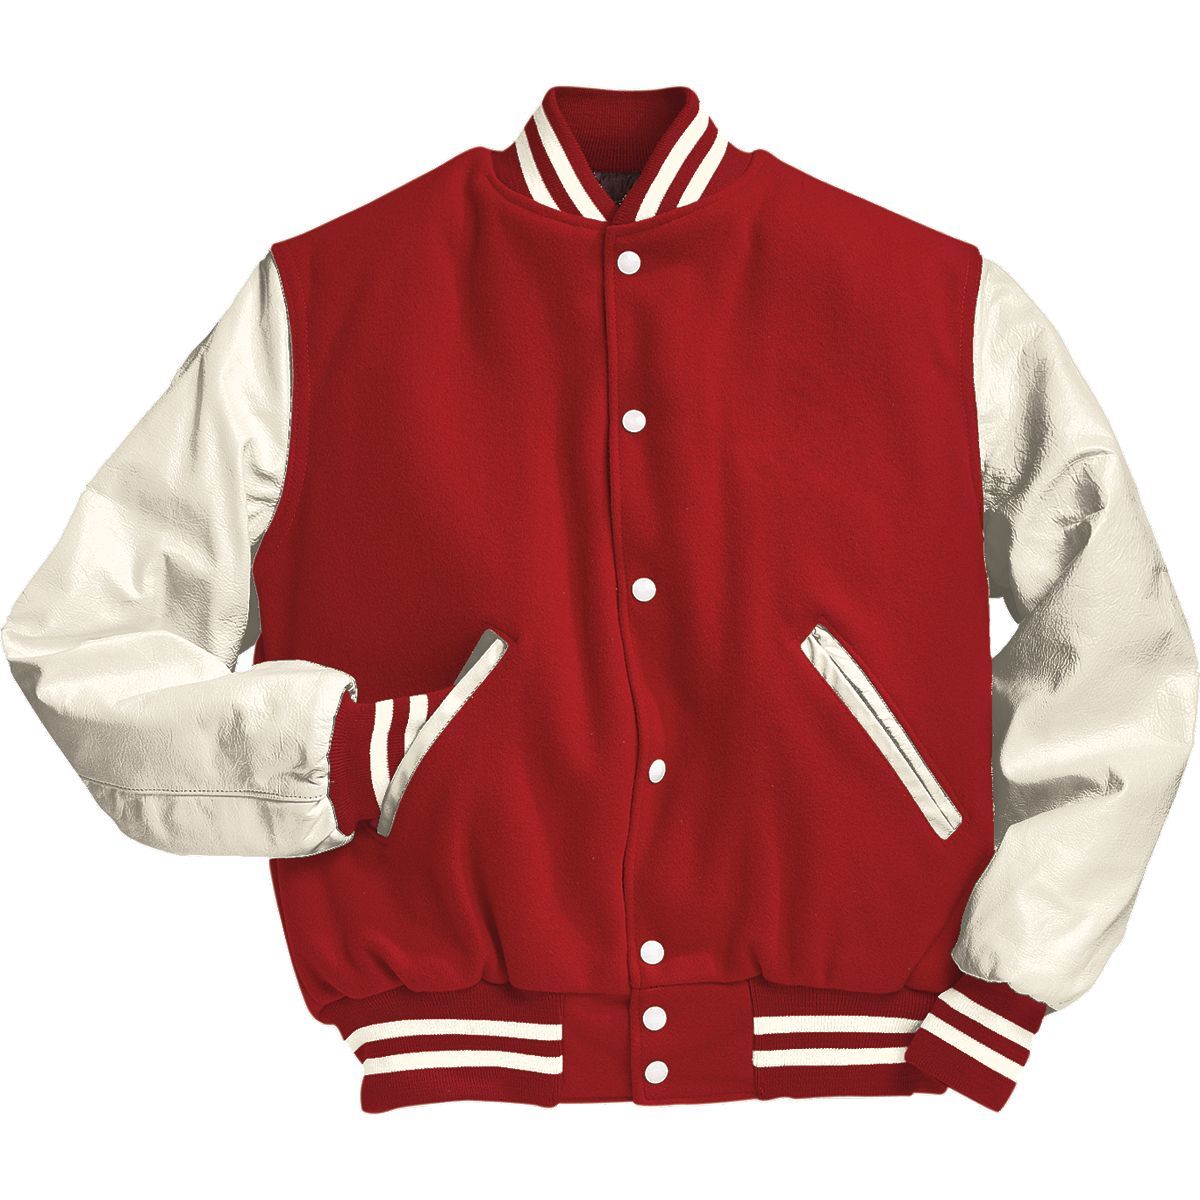 Holloway Award Jacket in Scarlet/White  -Part of the Adult, Adult-Jacket, Holloway, Outerwear product lines at KanaleyCreations.com